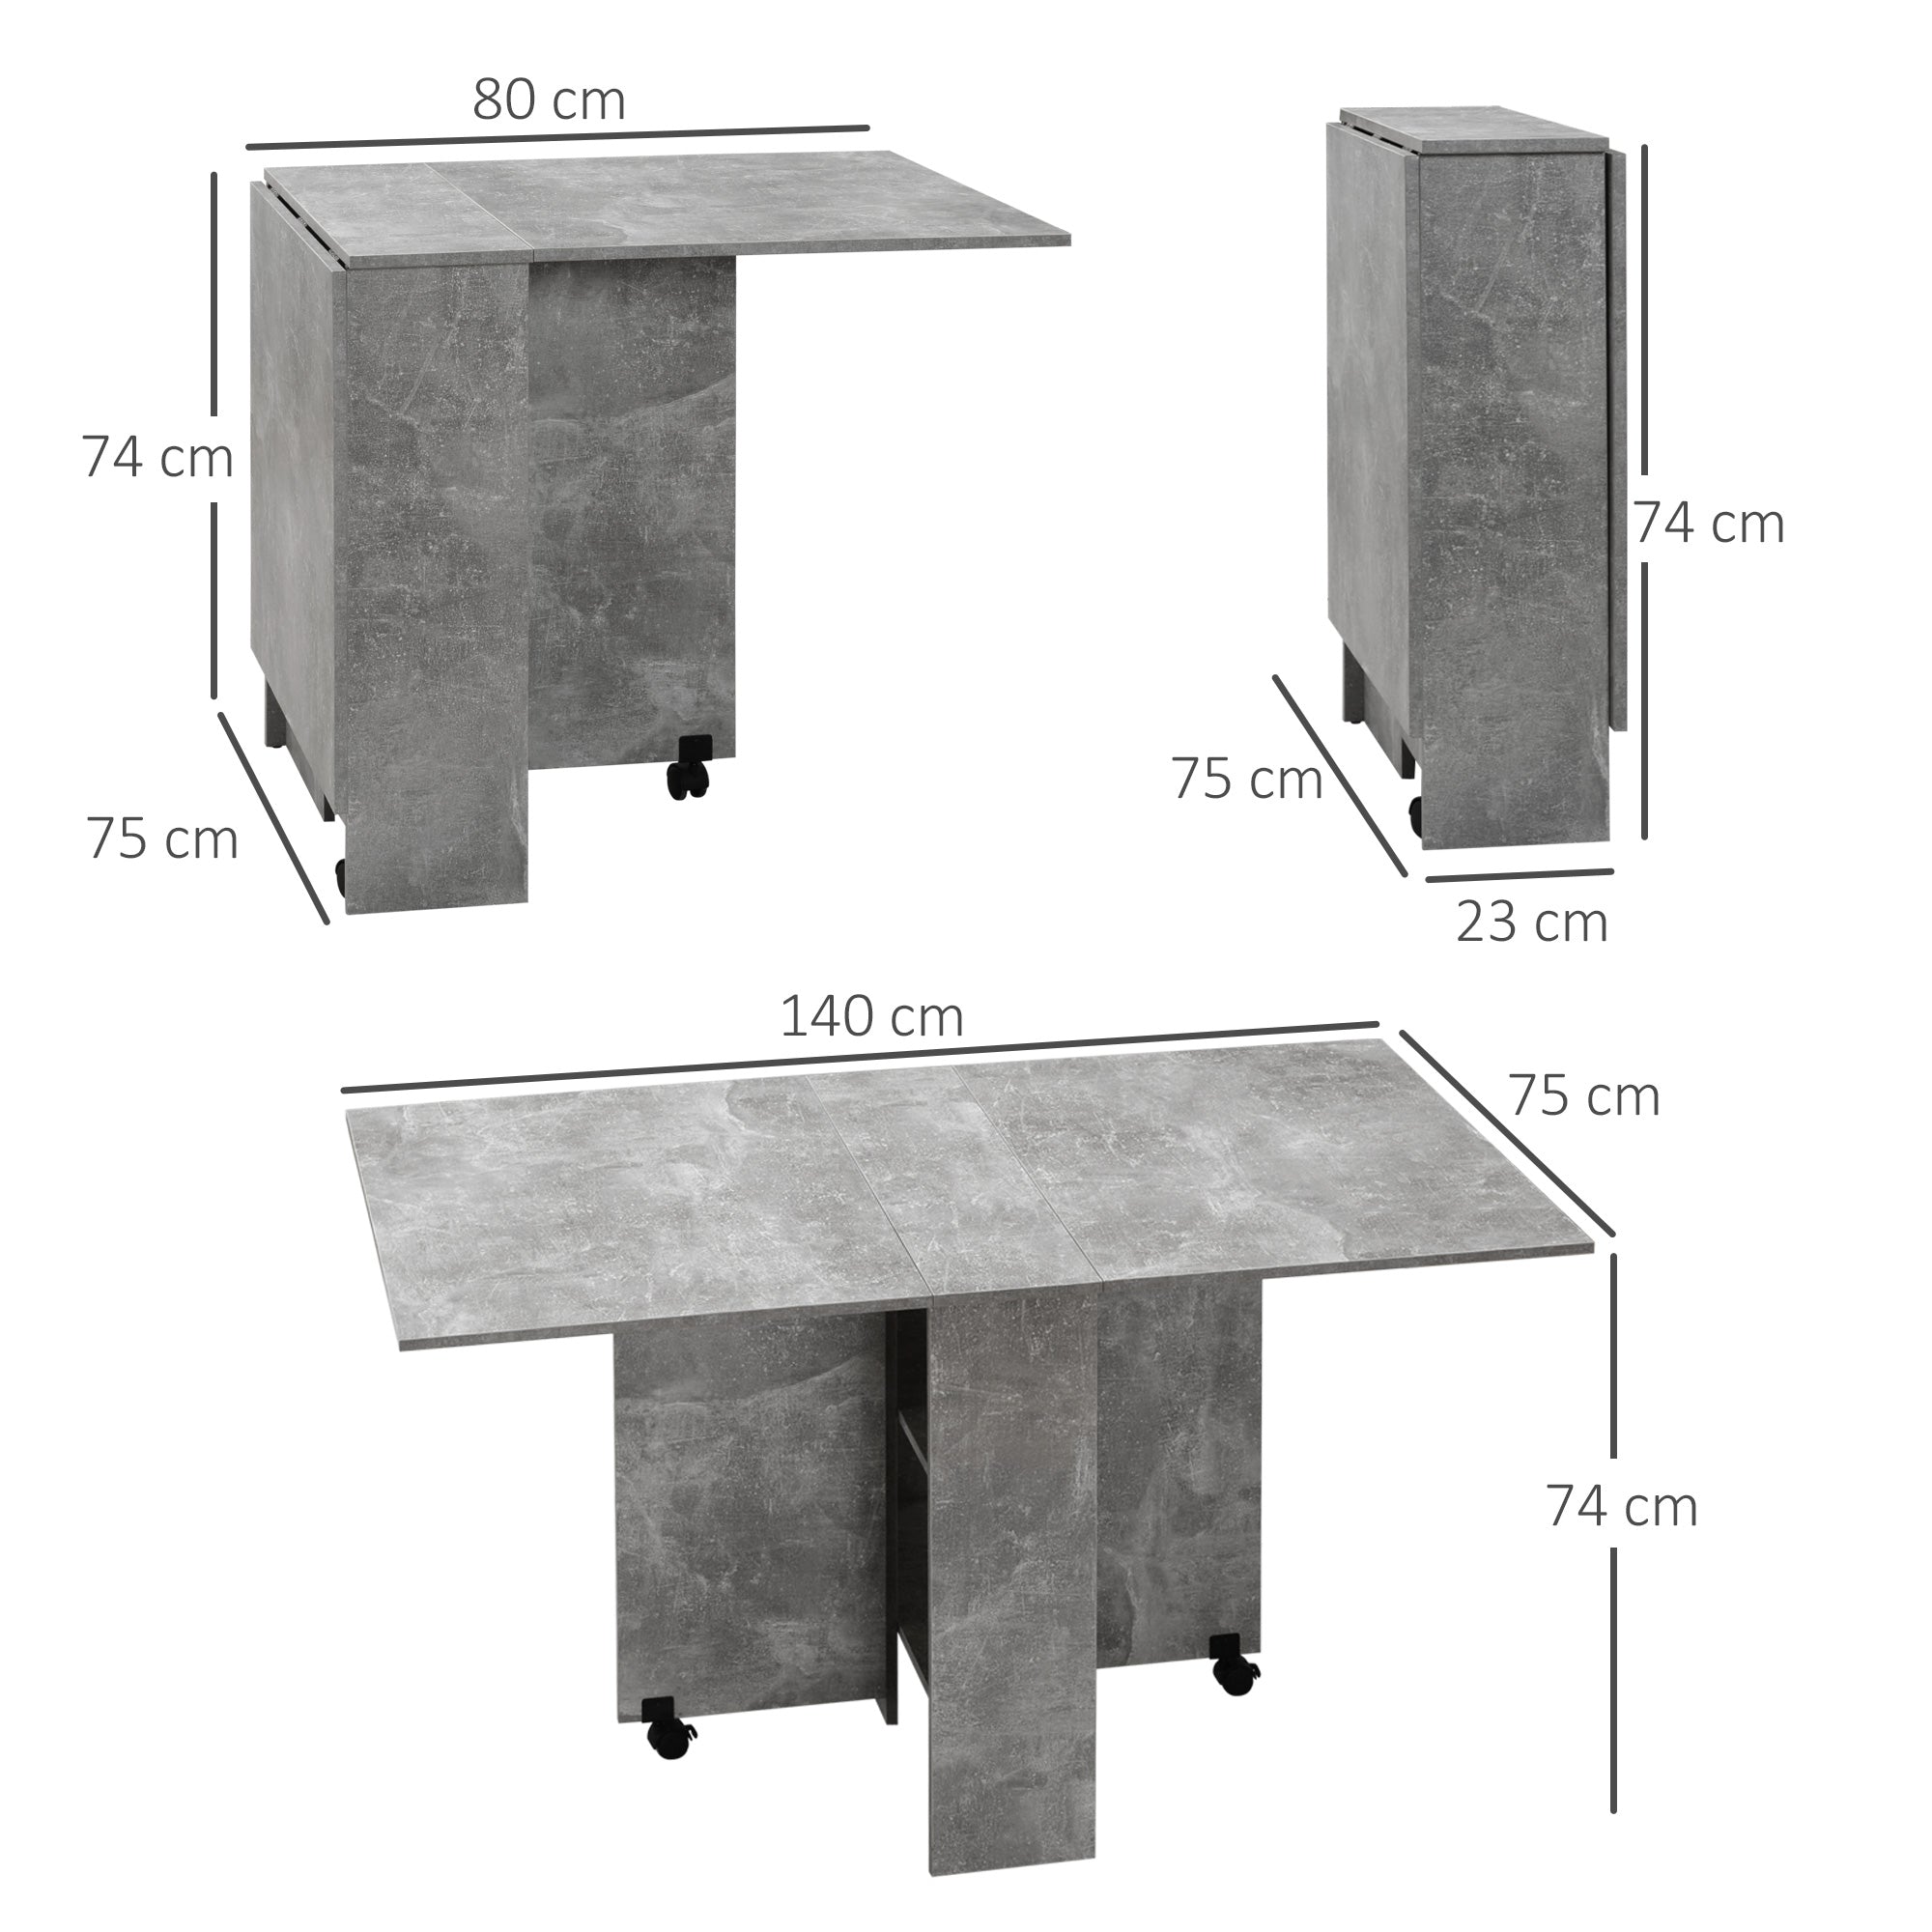 Folding Dining Table, Drop Leaf Table for Small Spaces with 2-tier Shelves, Small Kitchen Table with Rolling Casters, Cement Grey-2